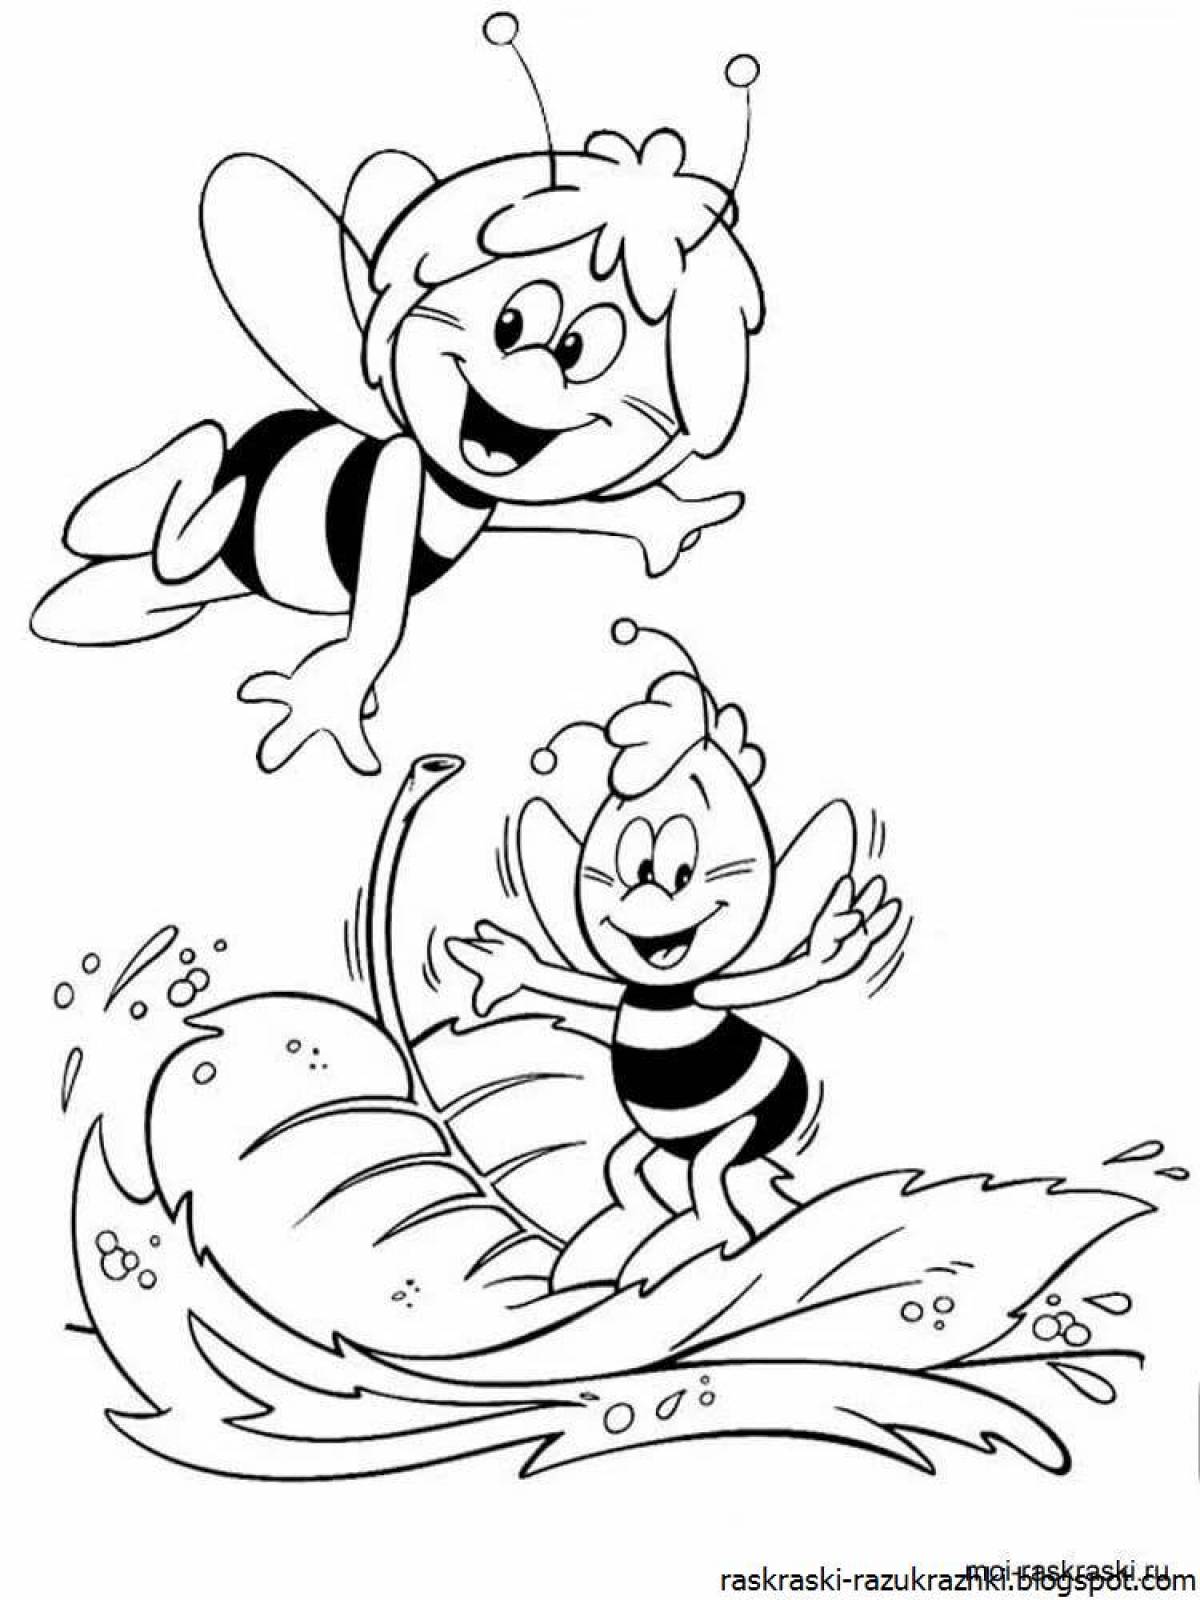 Amazing bee coloring page